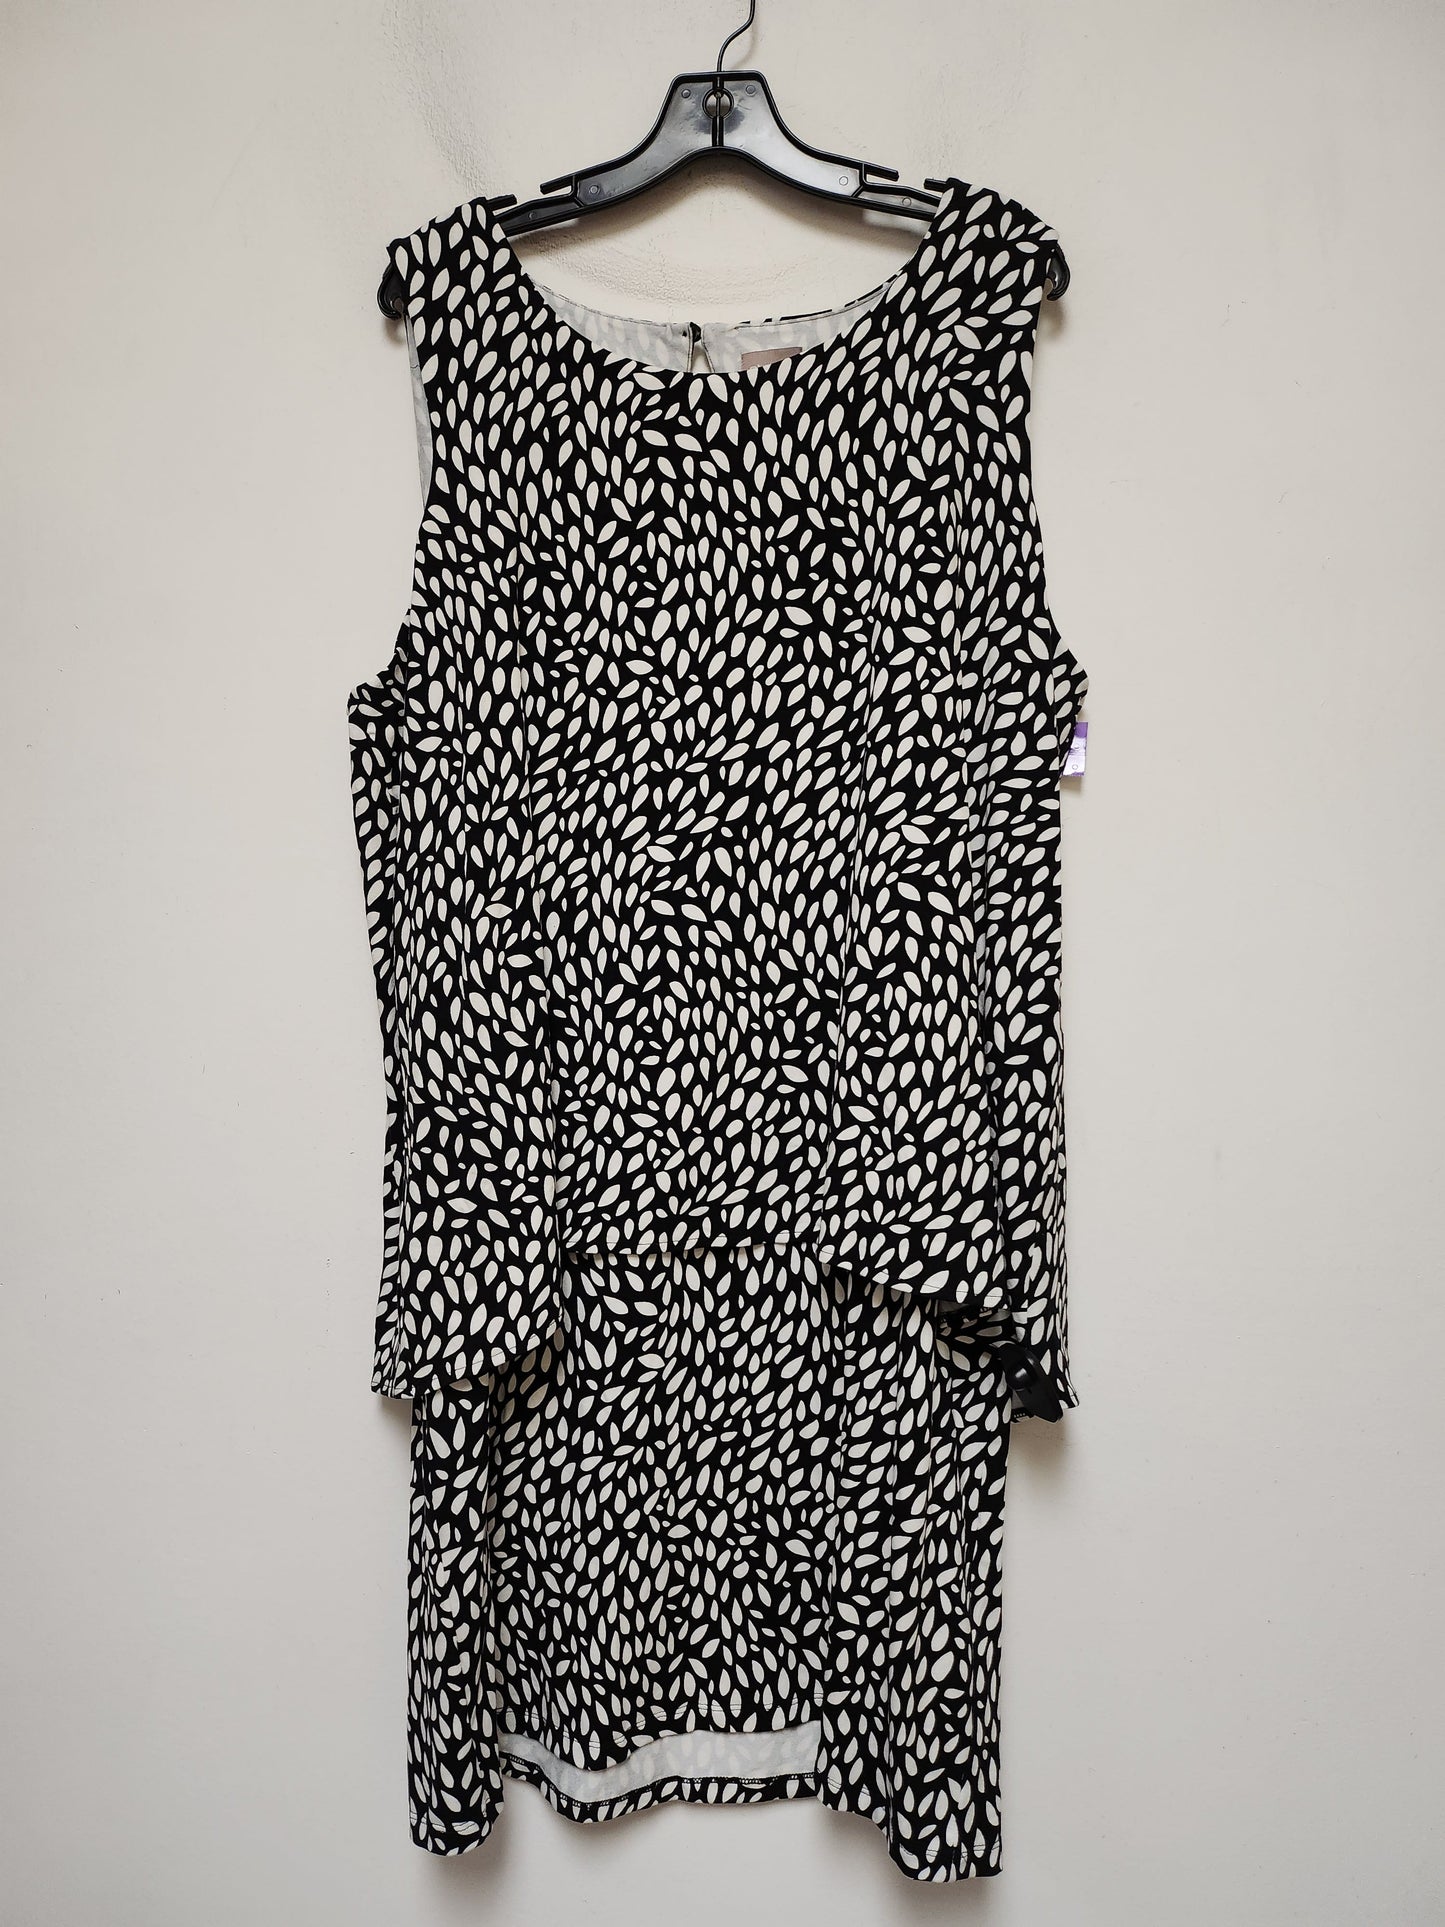 Black & White Dress Casual Short Chicos, Size 2x